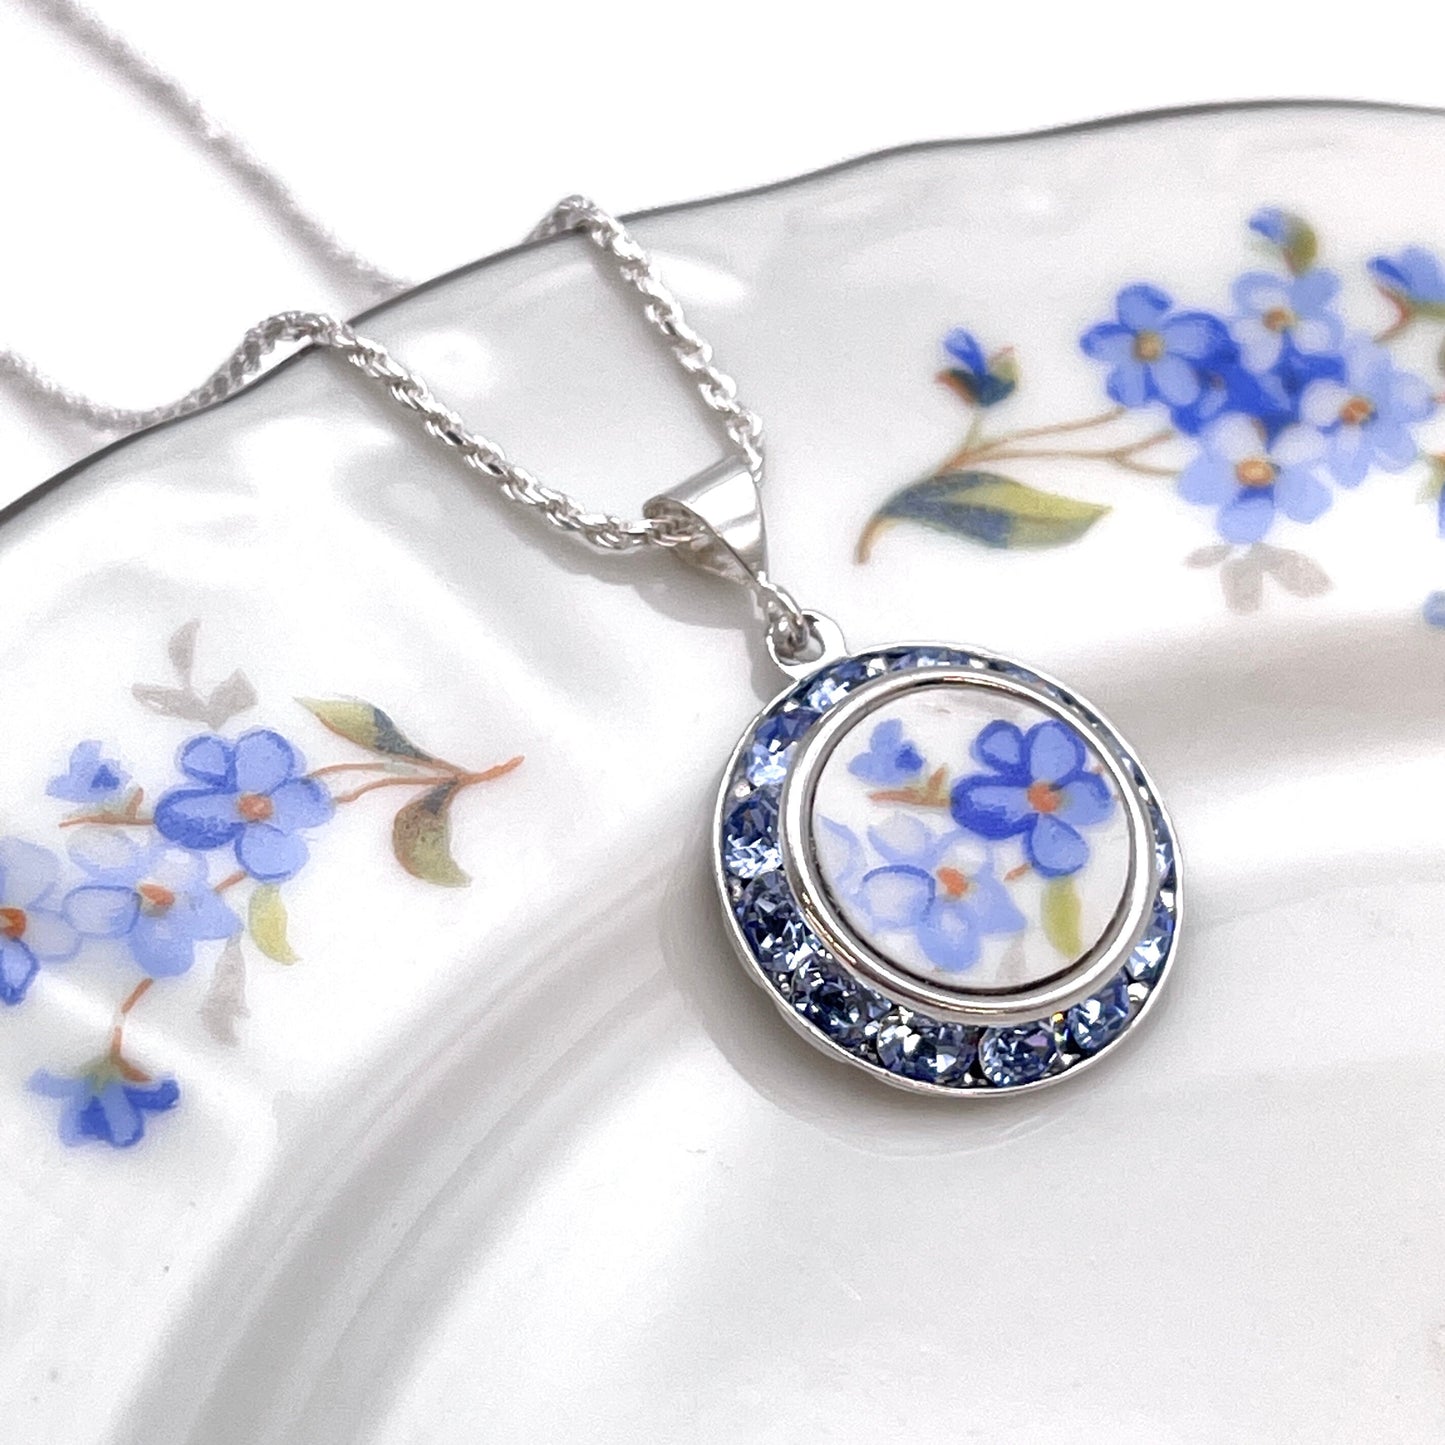 Dainty Forget Me Not China Necklace, Unique Birthday Gifts for Women, Blue Crystal Necklace, Vintage Broken China Jewelry, Gifts for Her